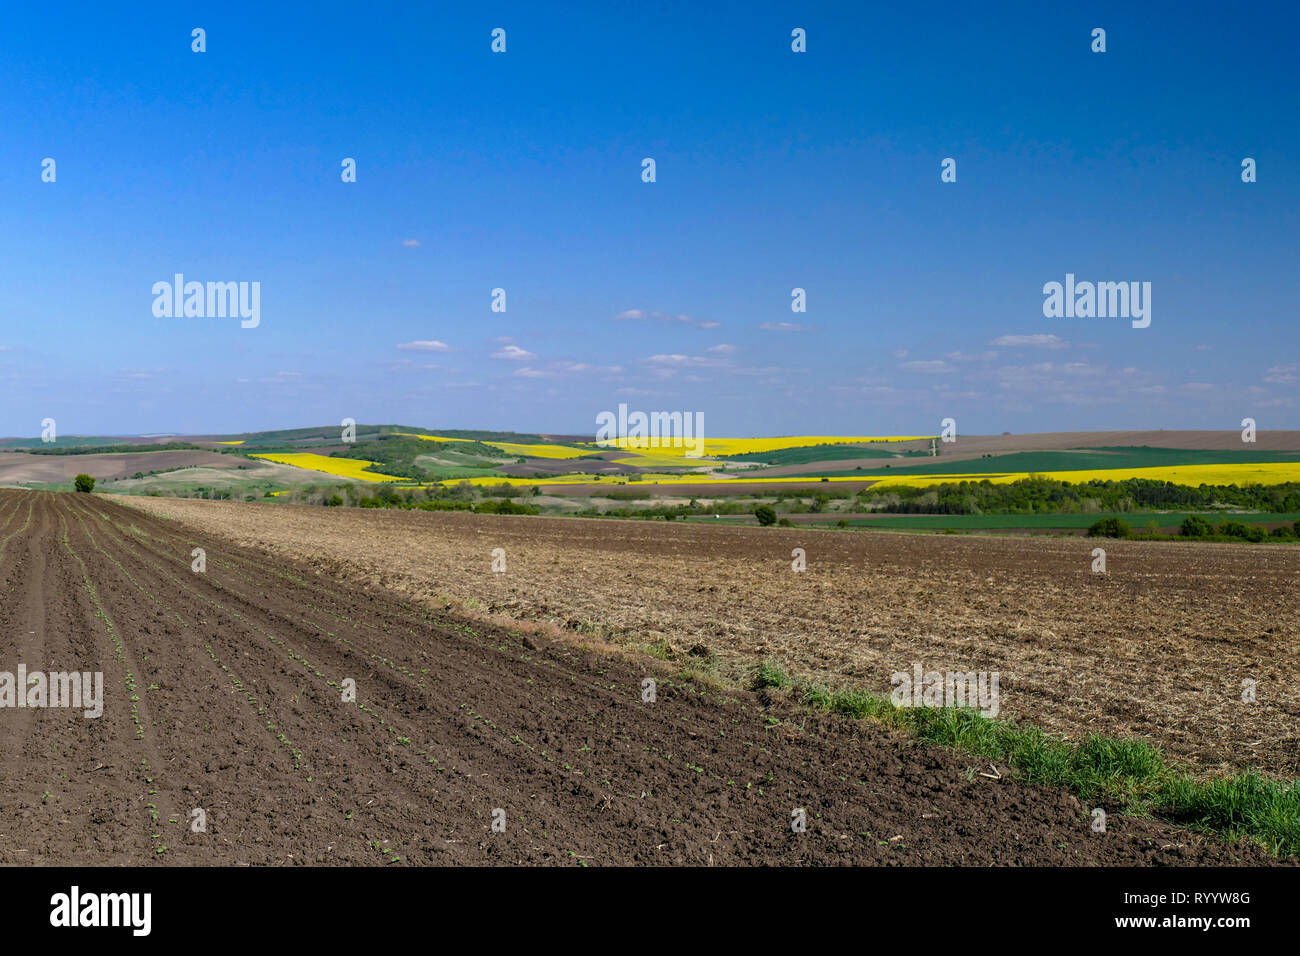 Extensive farmland with separate fields and blooming yellow rapeseed. Аrable land in the foreground. On the horizon a hill and a blue sky. Stock Photo